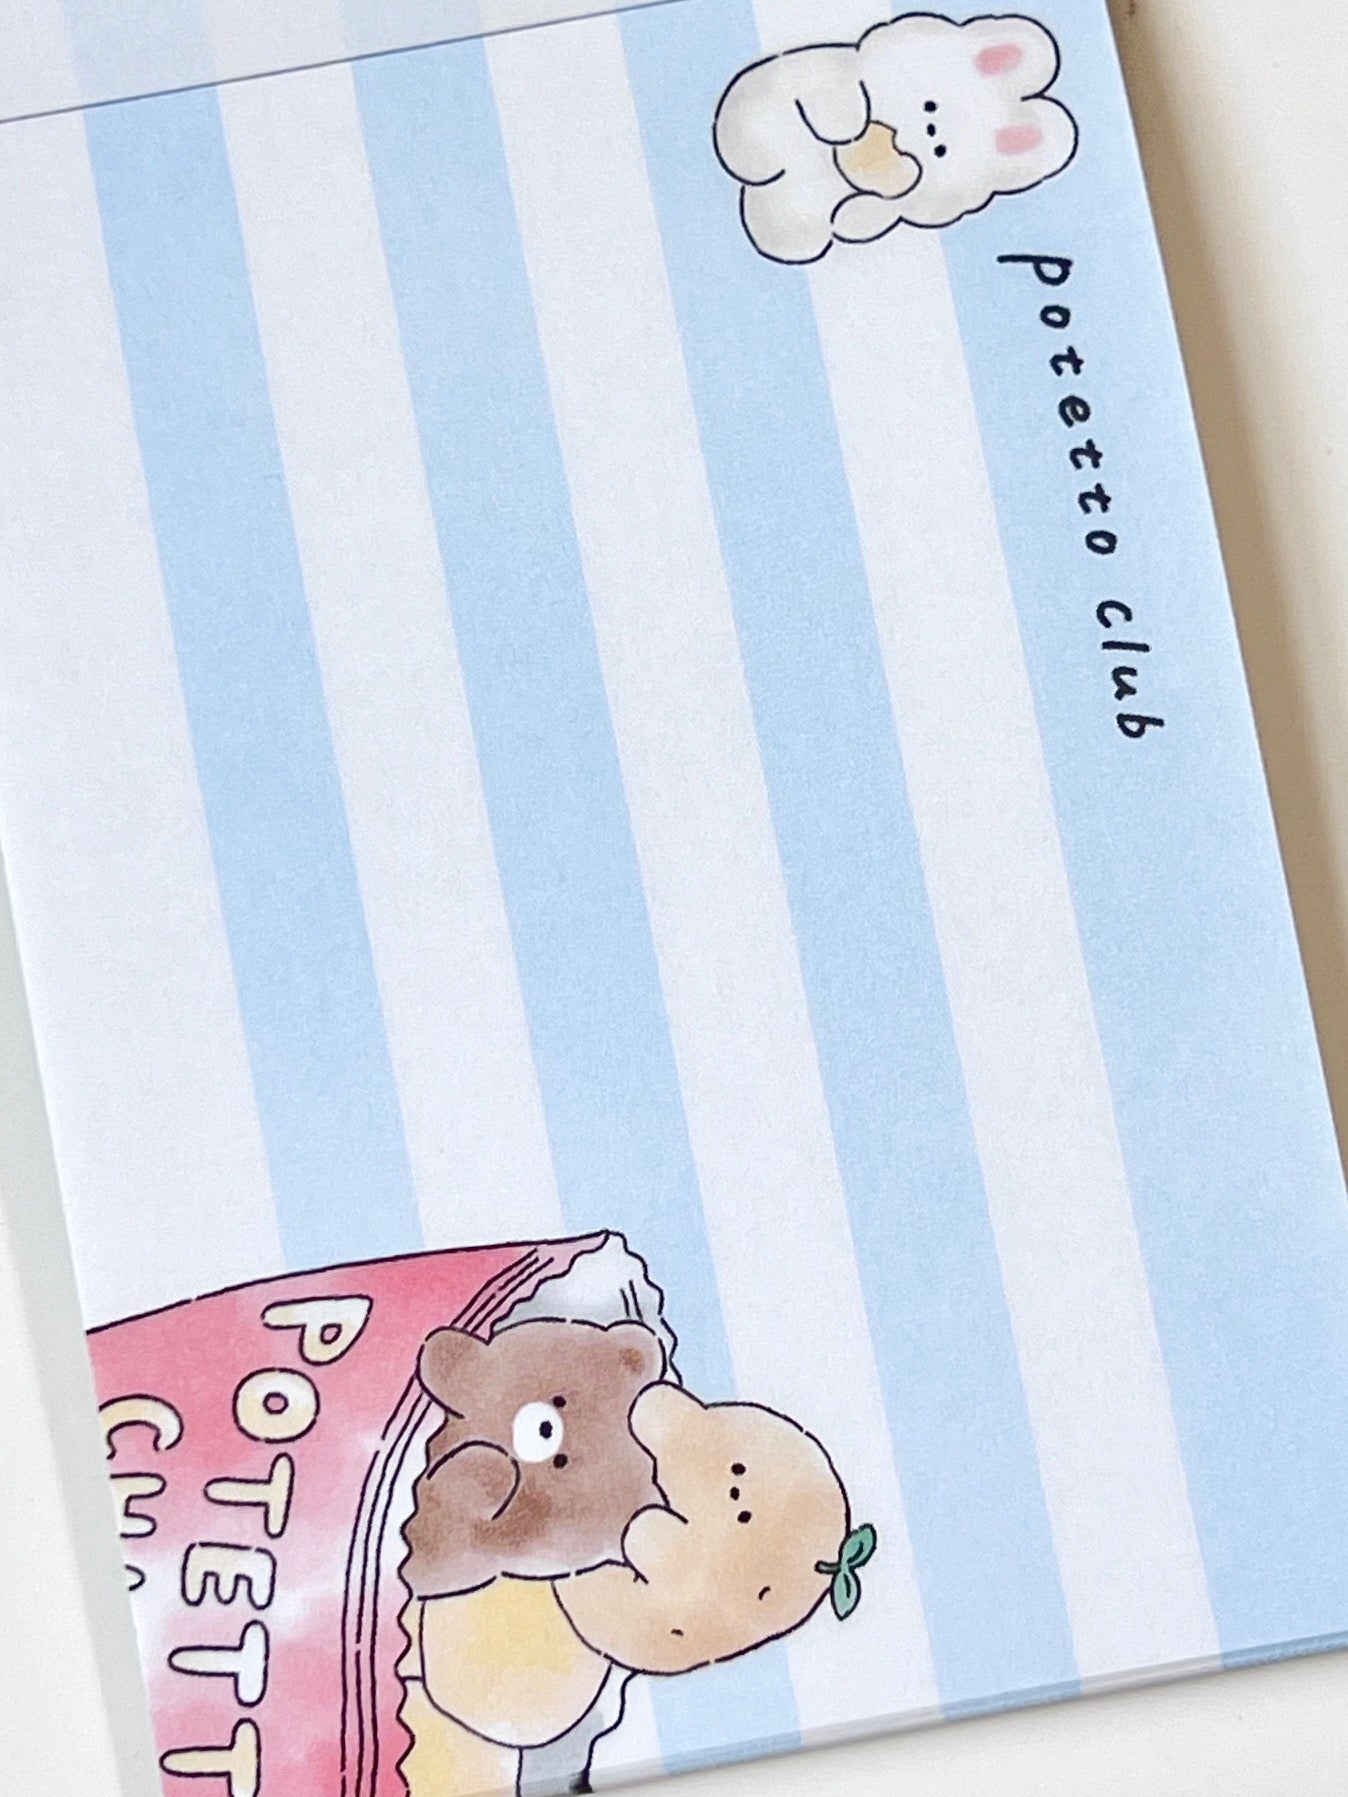 118777 Animal Chips Potetto Club Mini Notepad-10